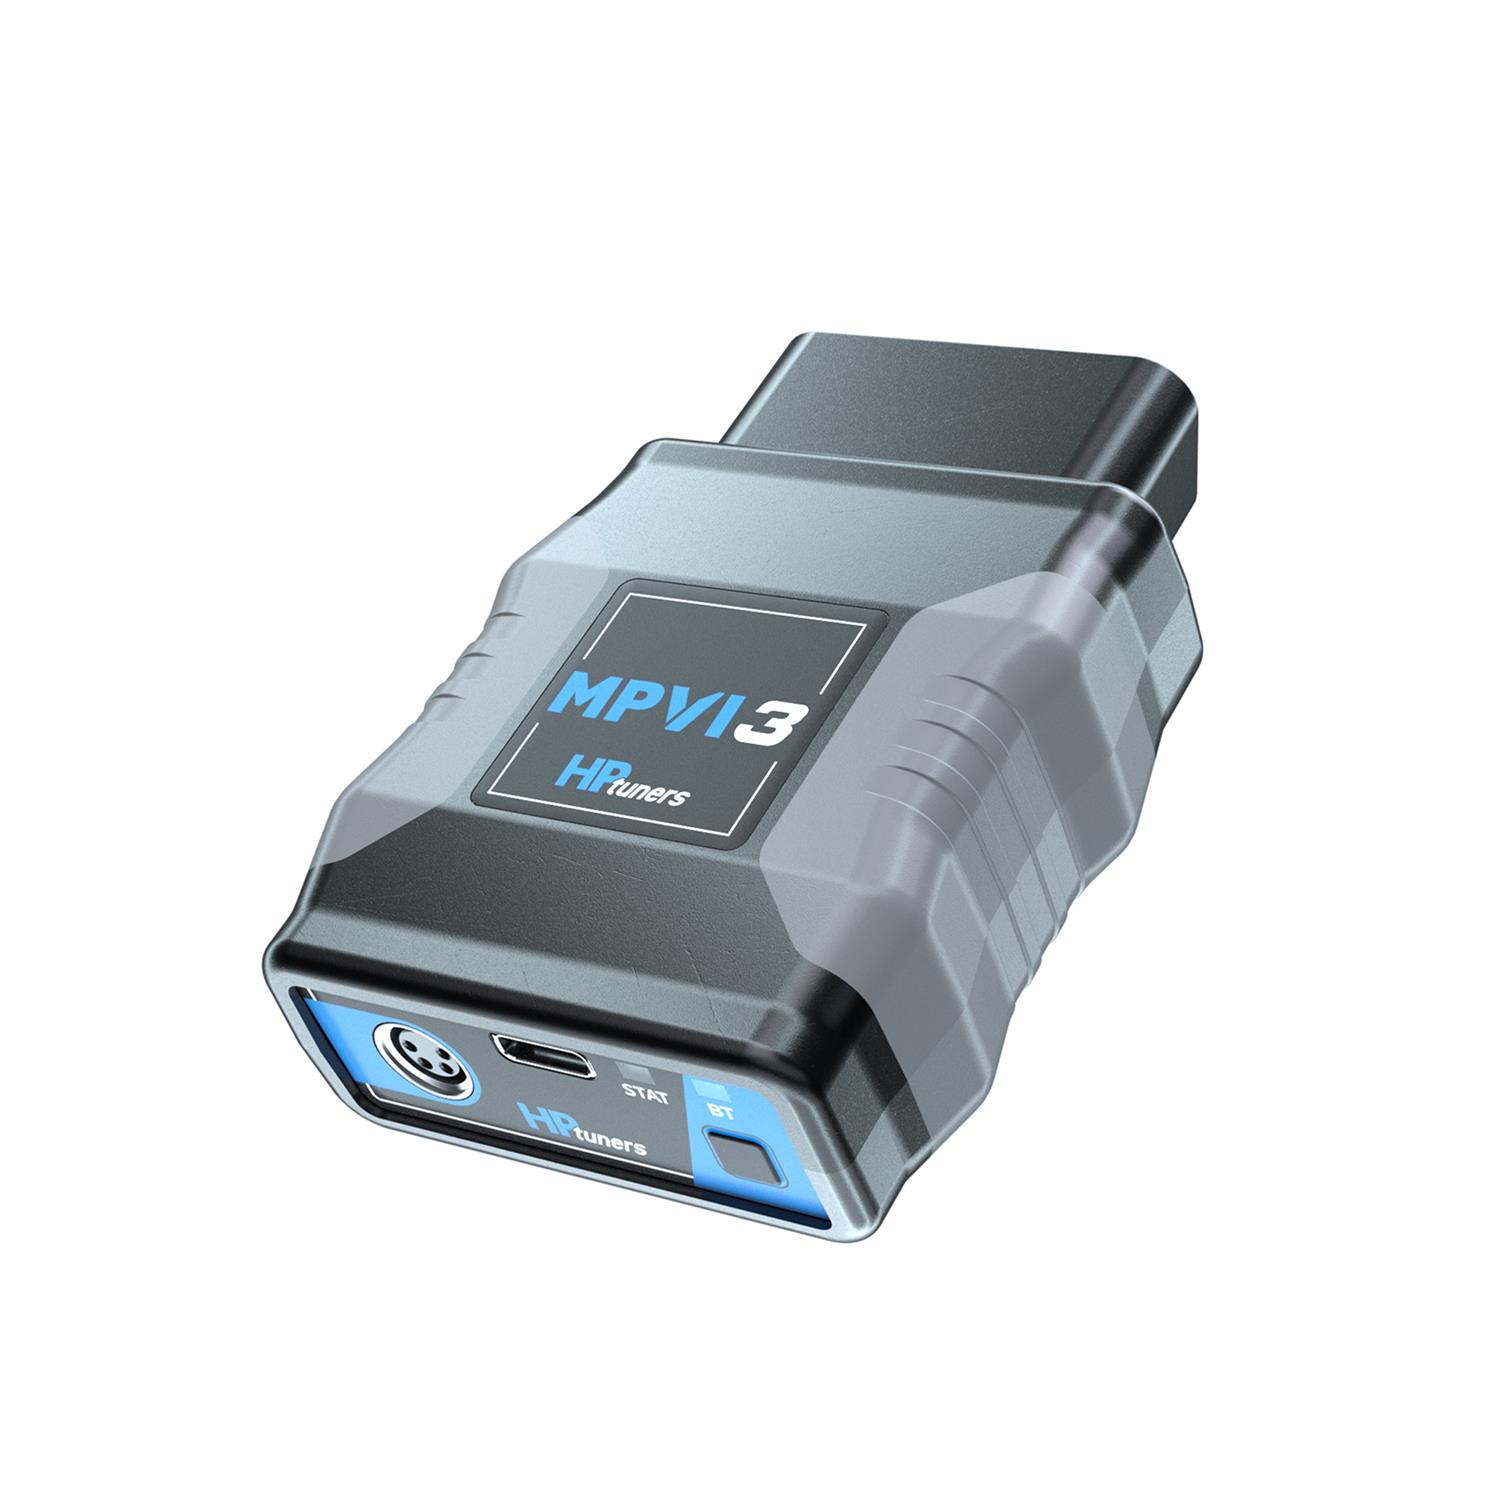 HP Tuners VCM Suite MPVI3 Credit Pro Packages M03-000-08, the latest generation of hardware from HP Tuners